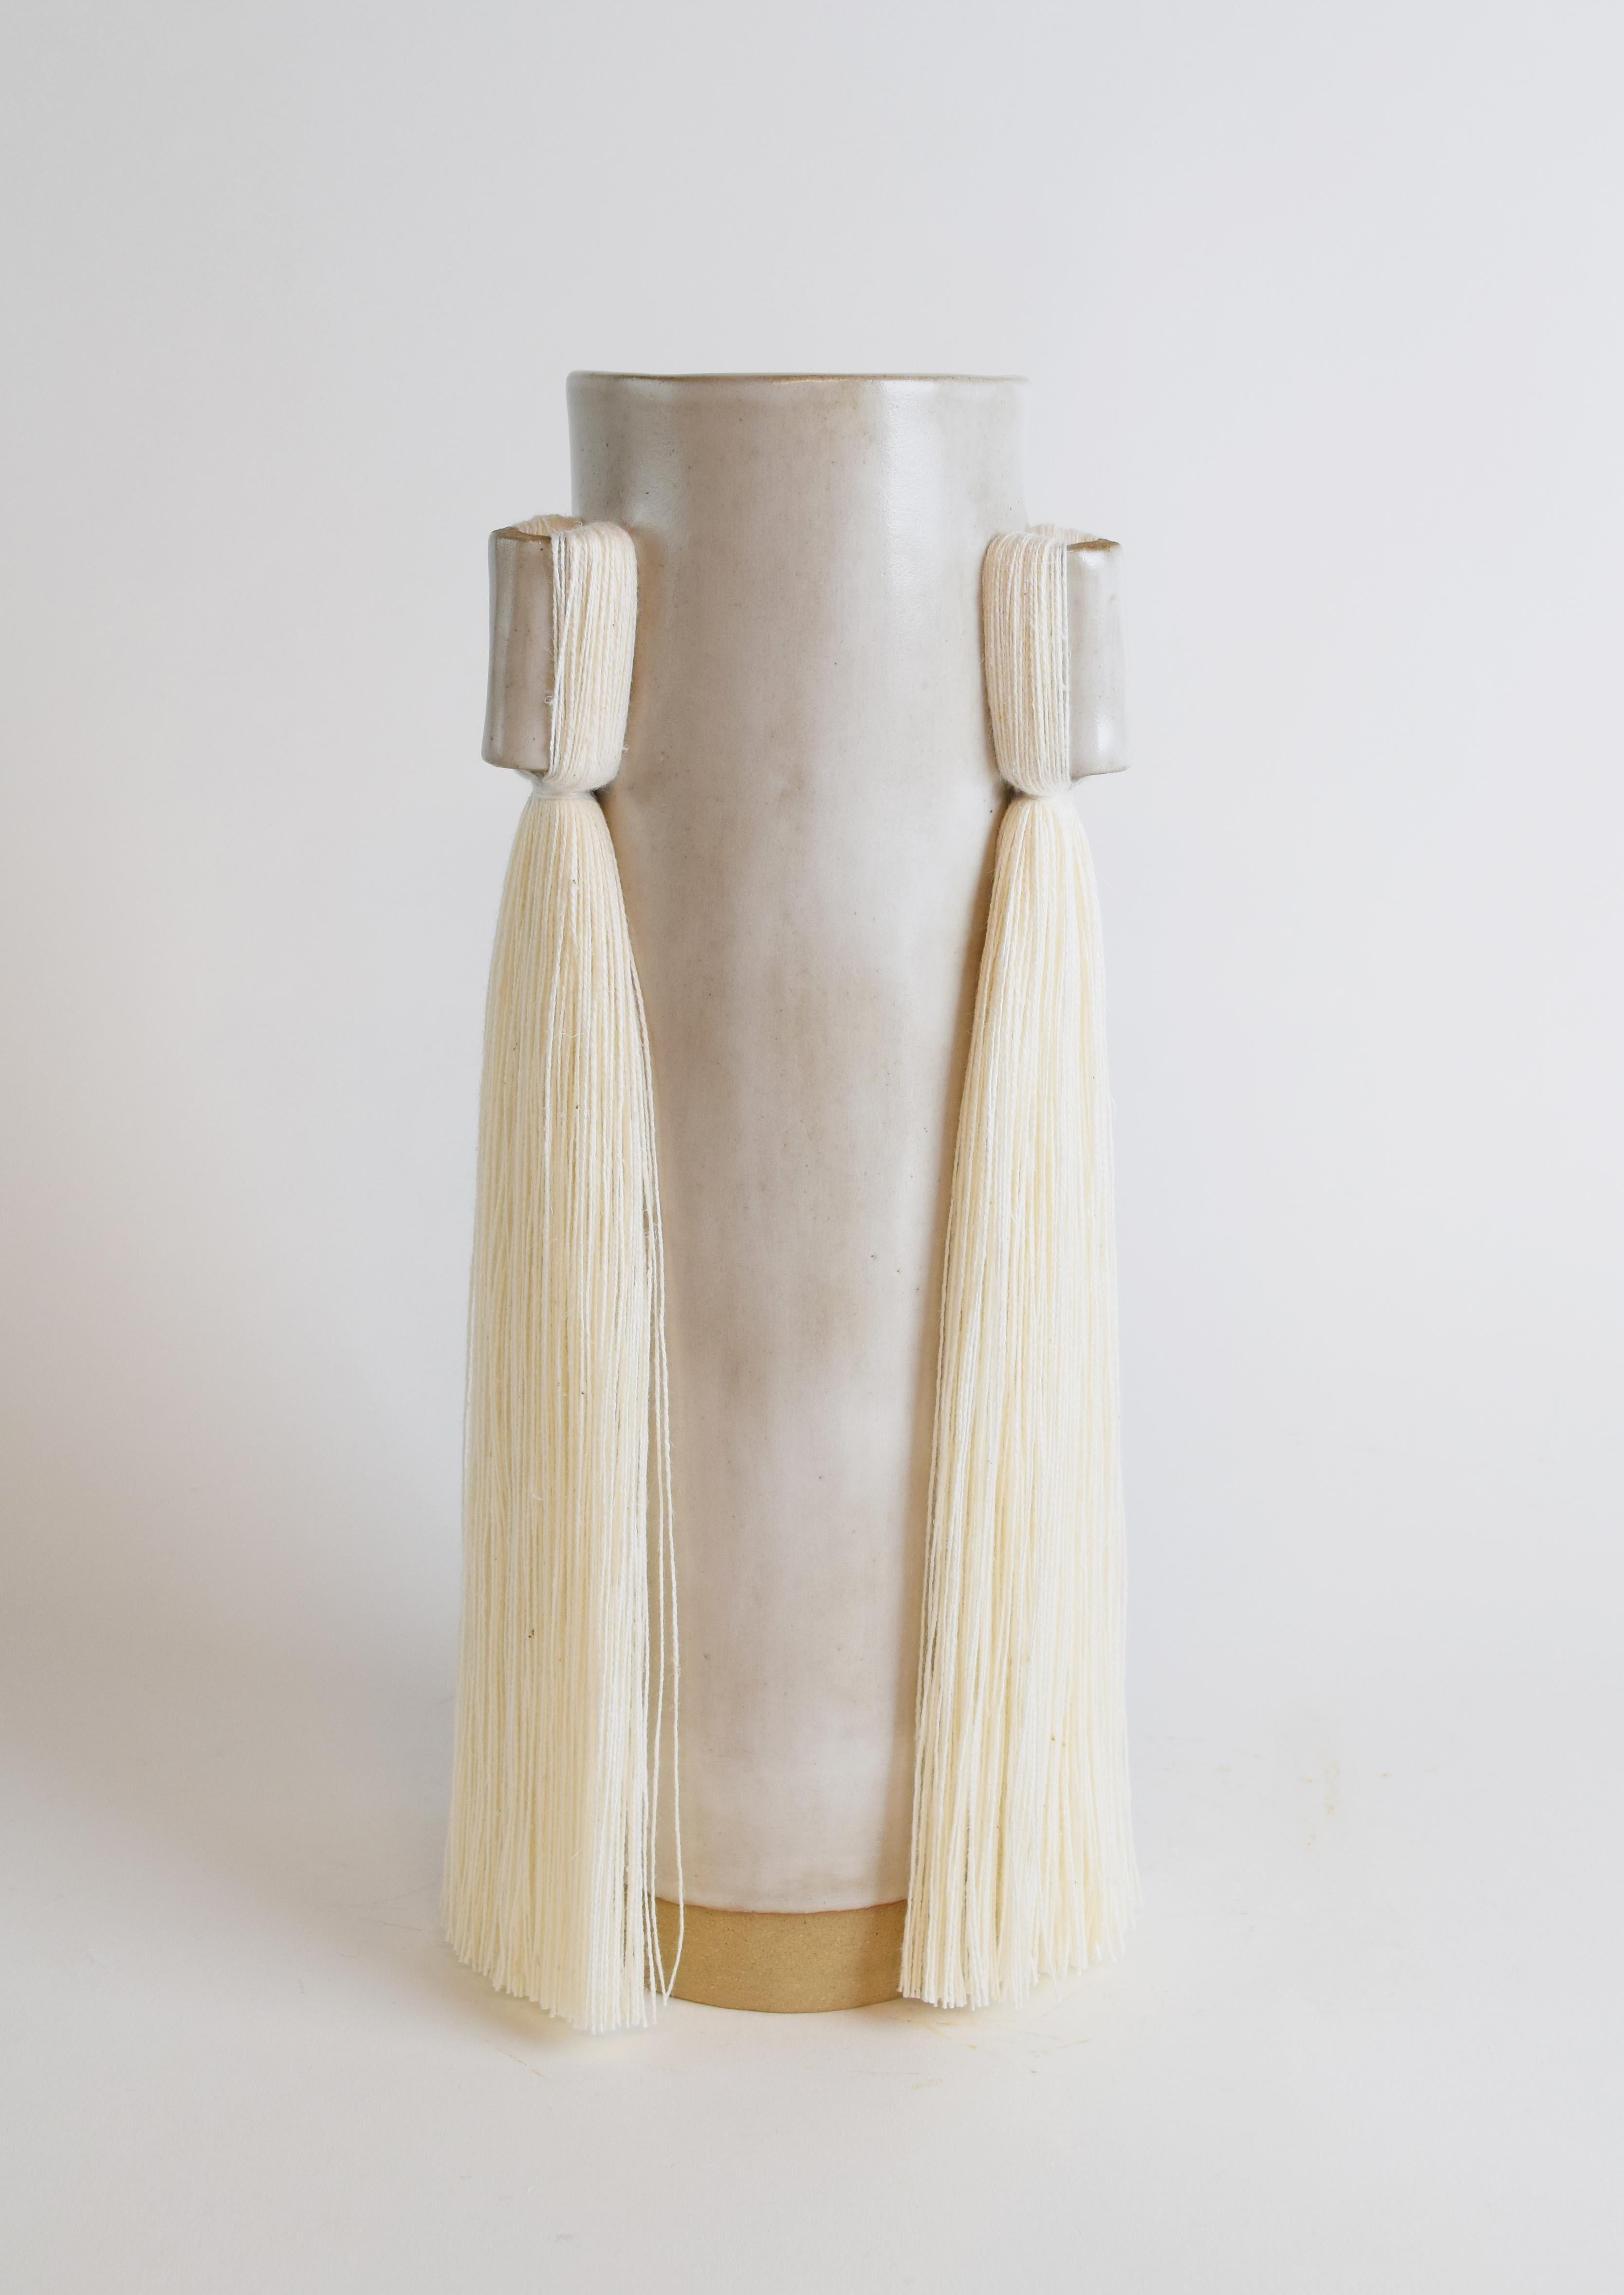 Vase #607 by Karen Gayle Tinney

Lengths of fringe adorn 3 sides of this vase which is sized generously to hold a large arrangement of flowers.

Hand formed stoneware with satin white glaze and white cotton fringe detail. Inside is glazed white,